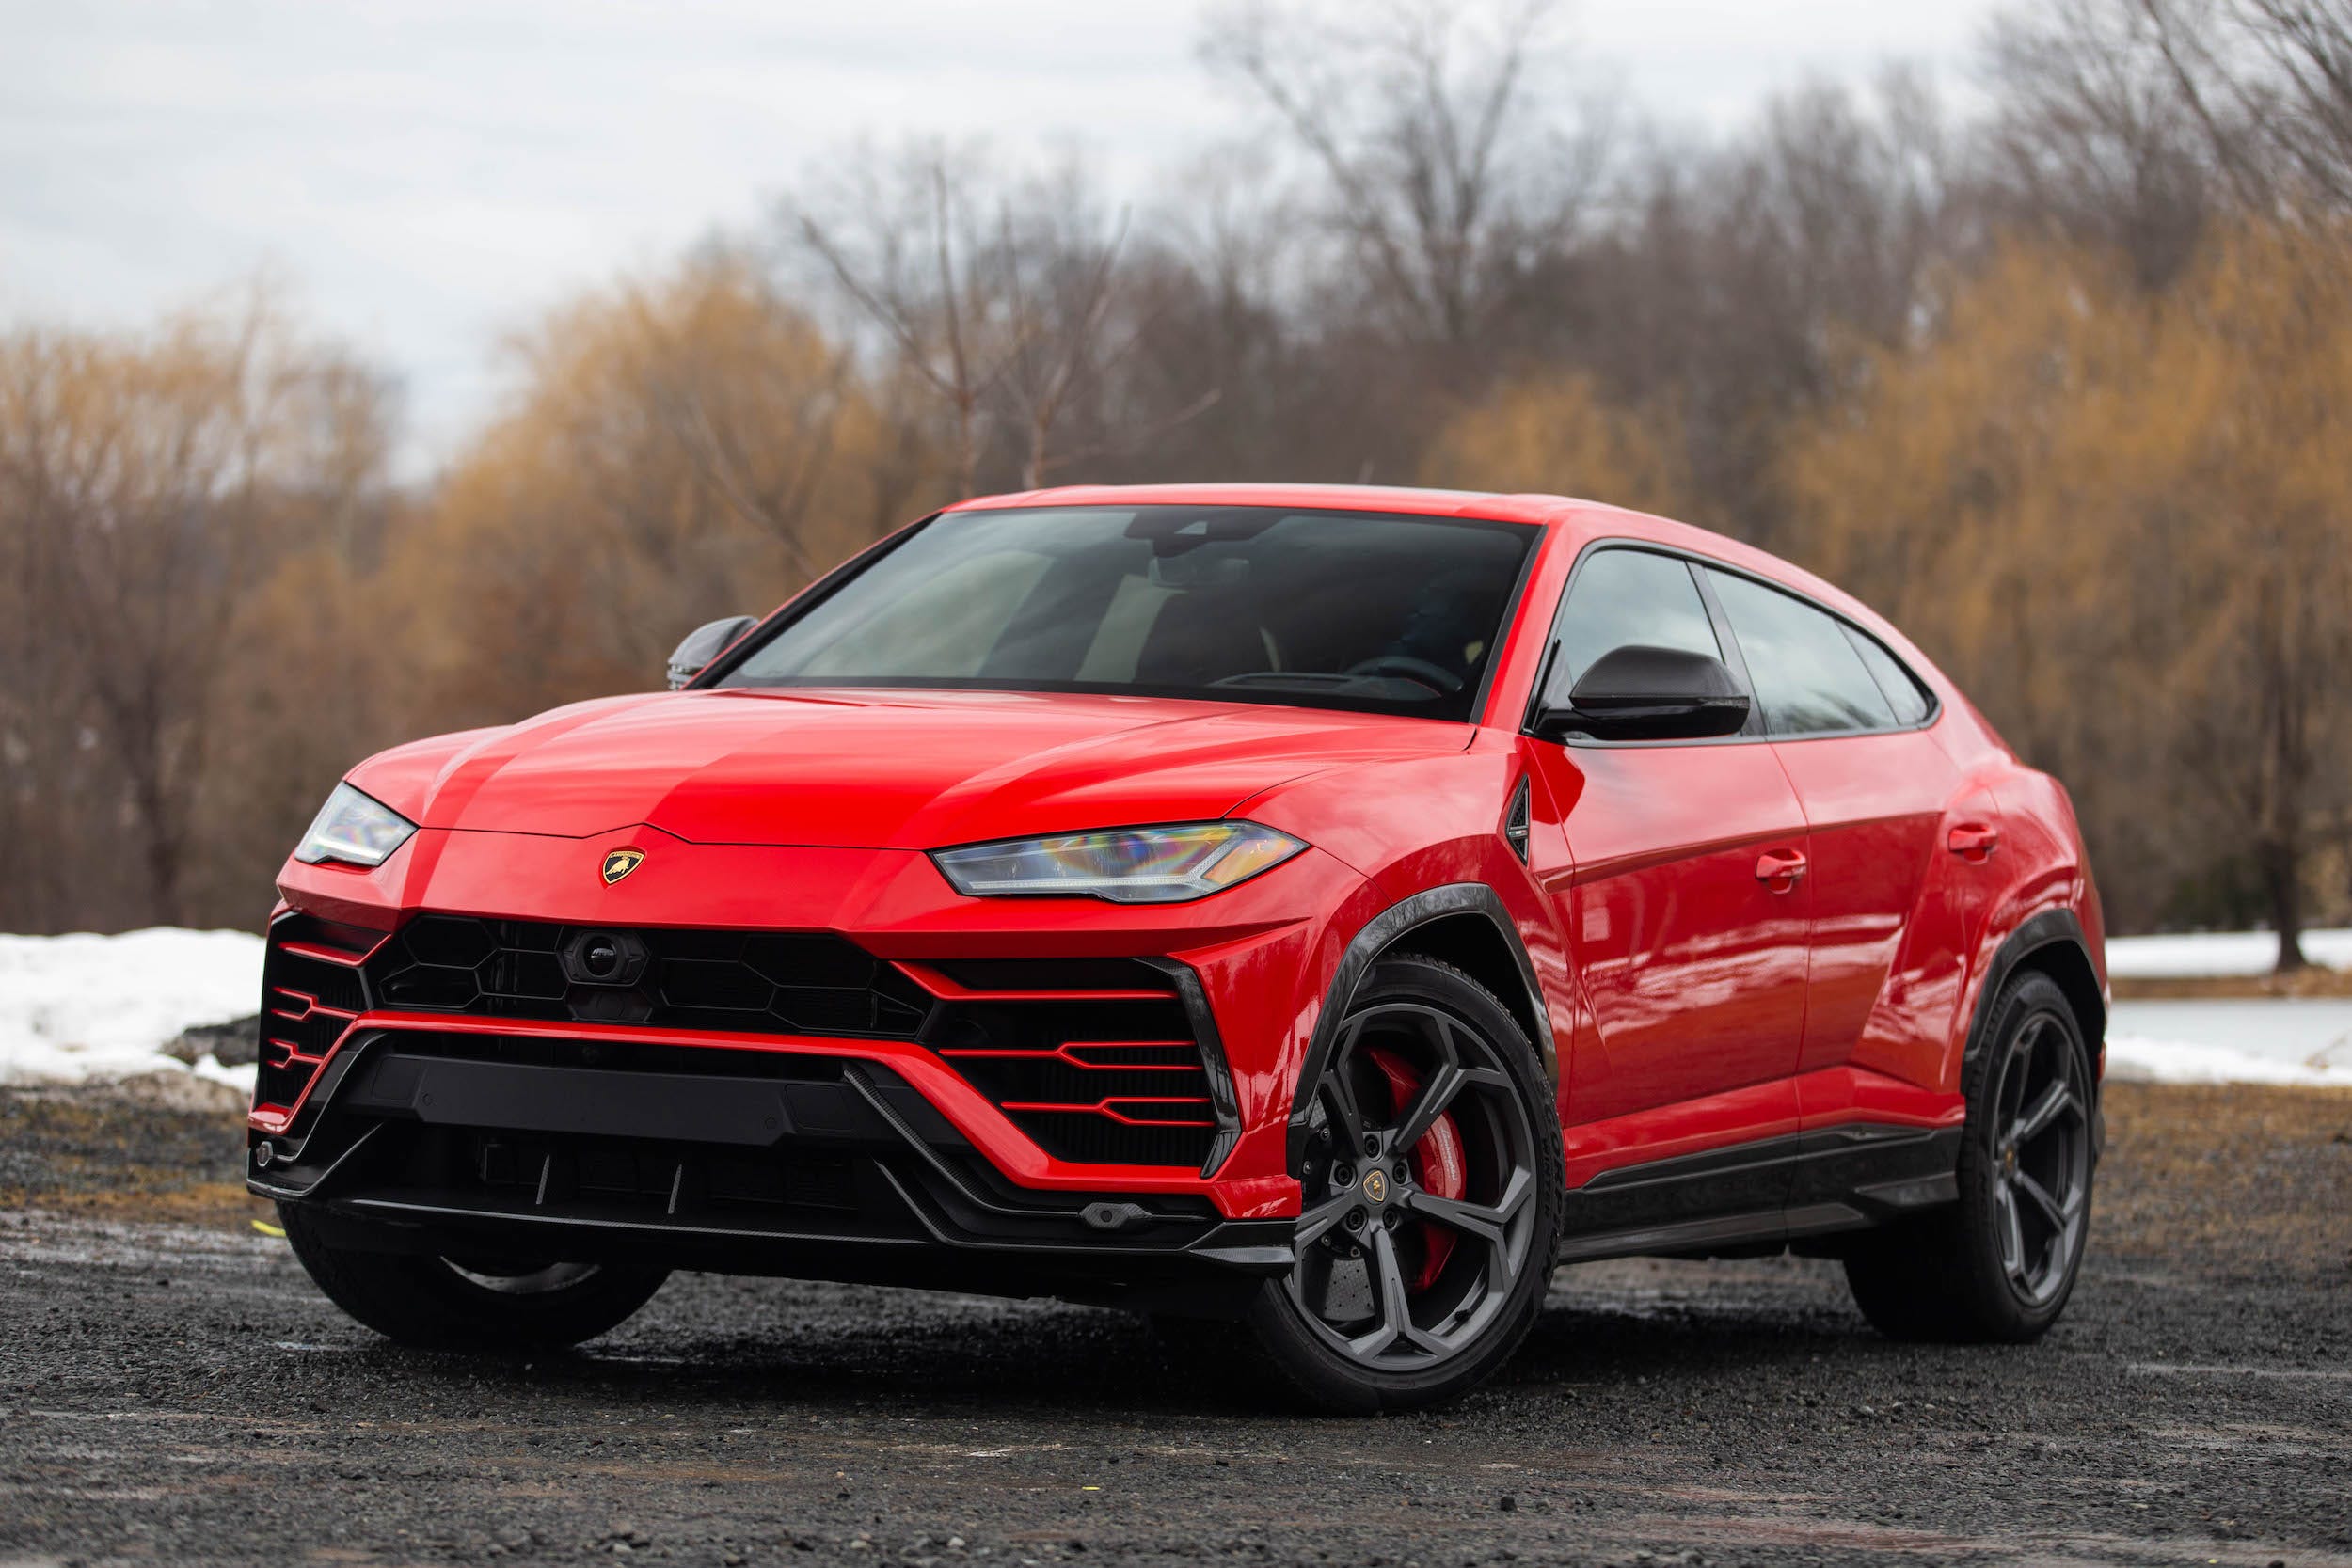 Review The 272,00 Urus is king of the SUVs, but it's